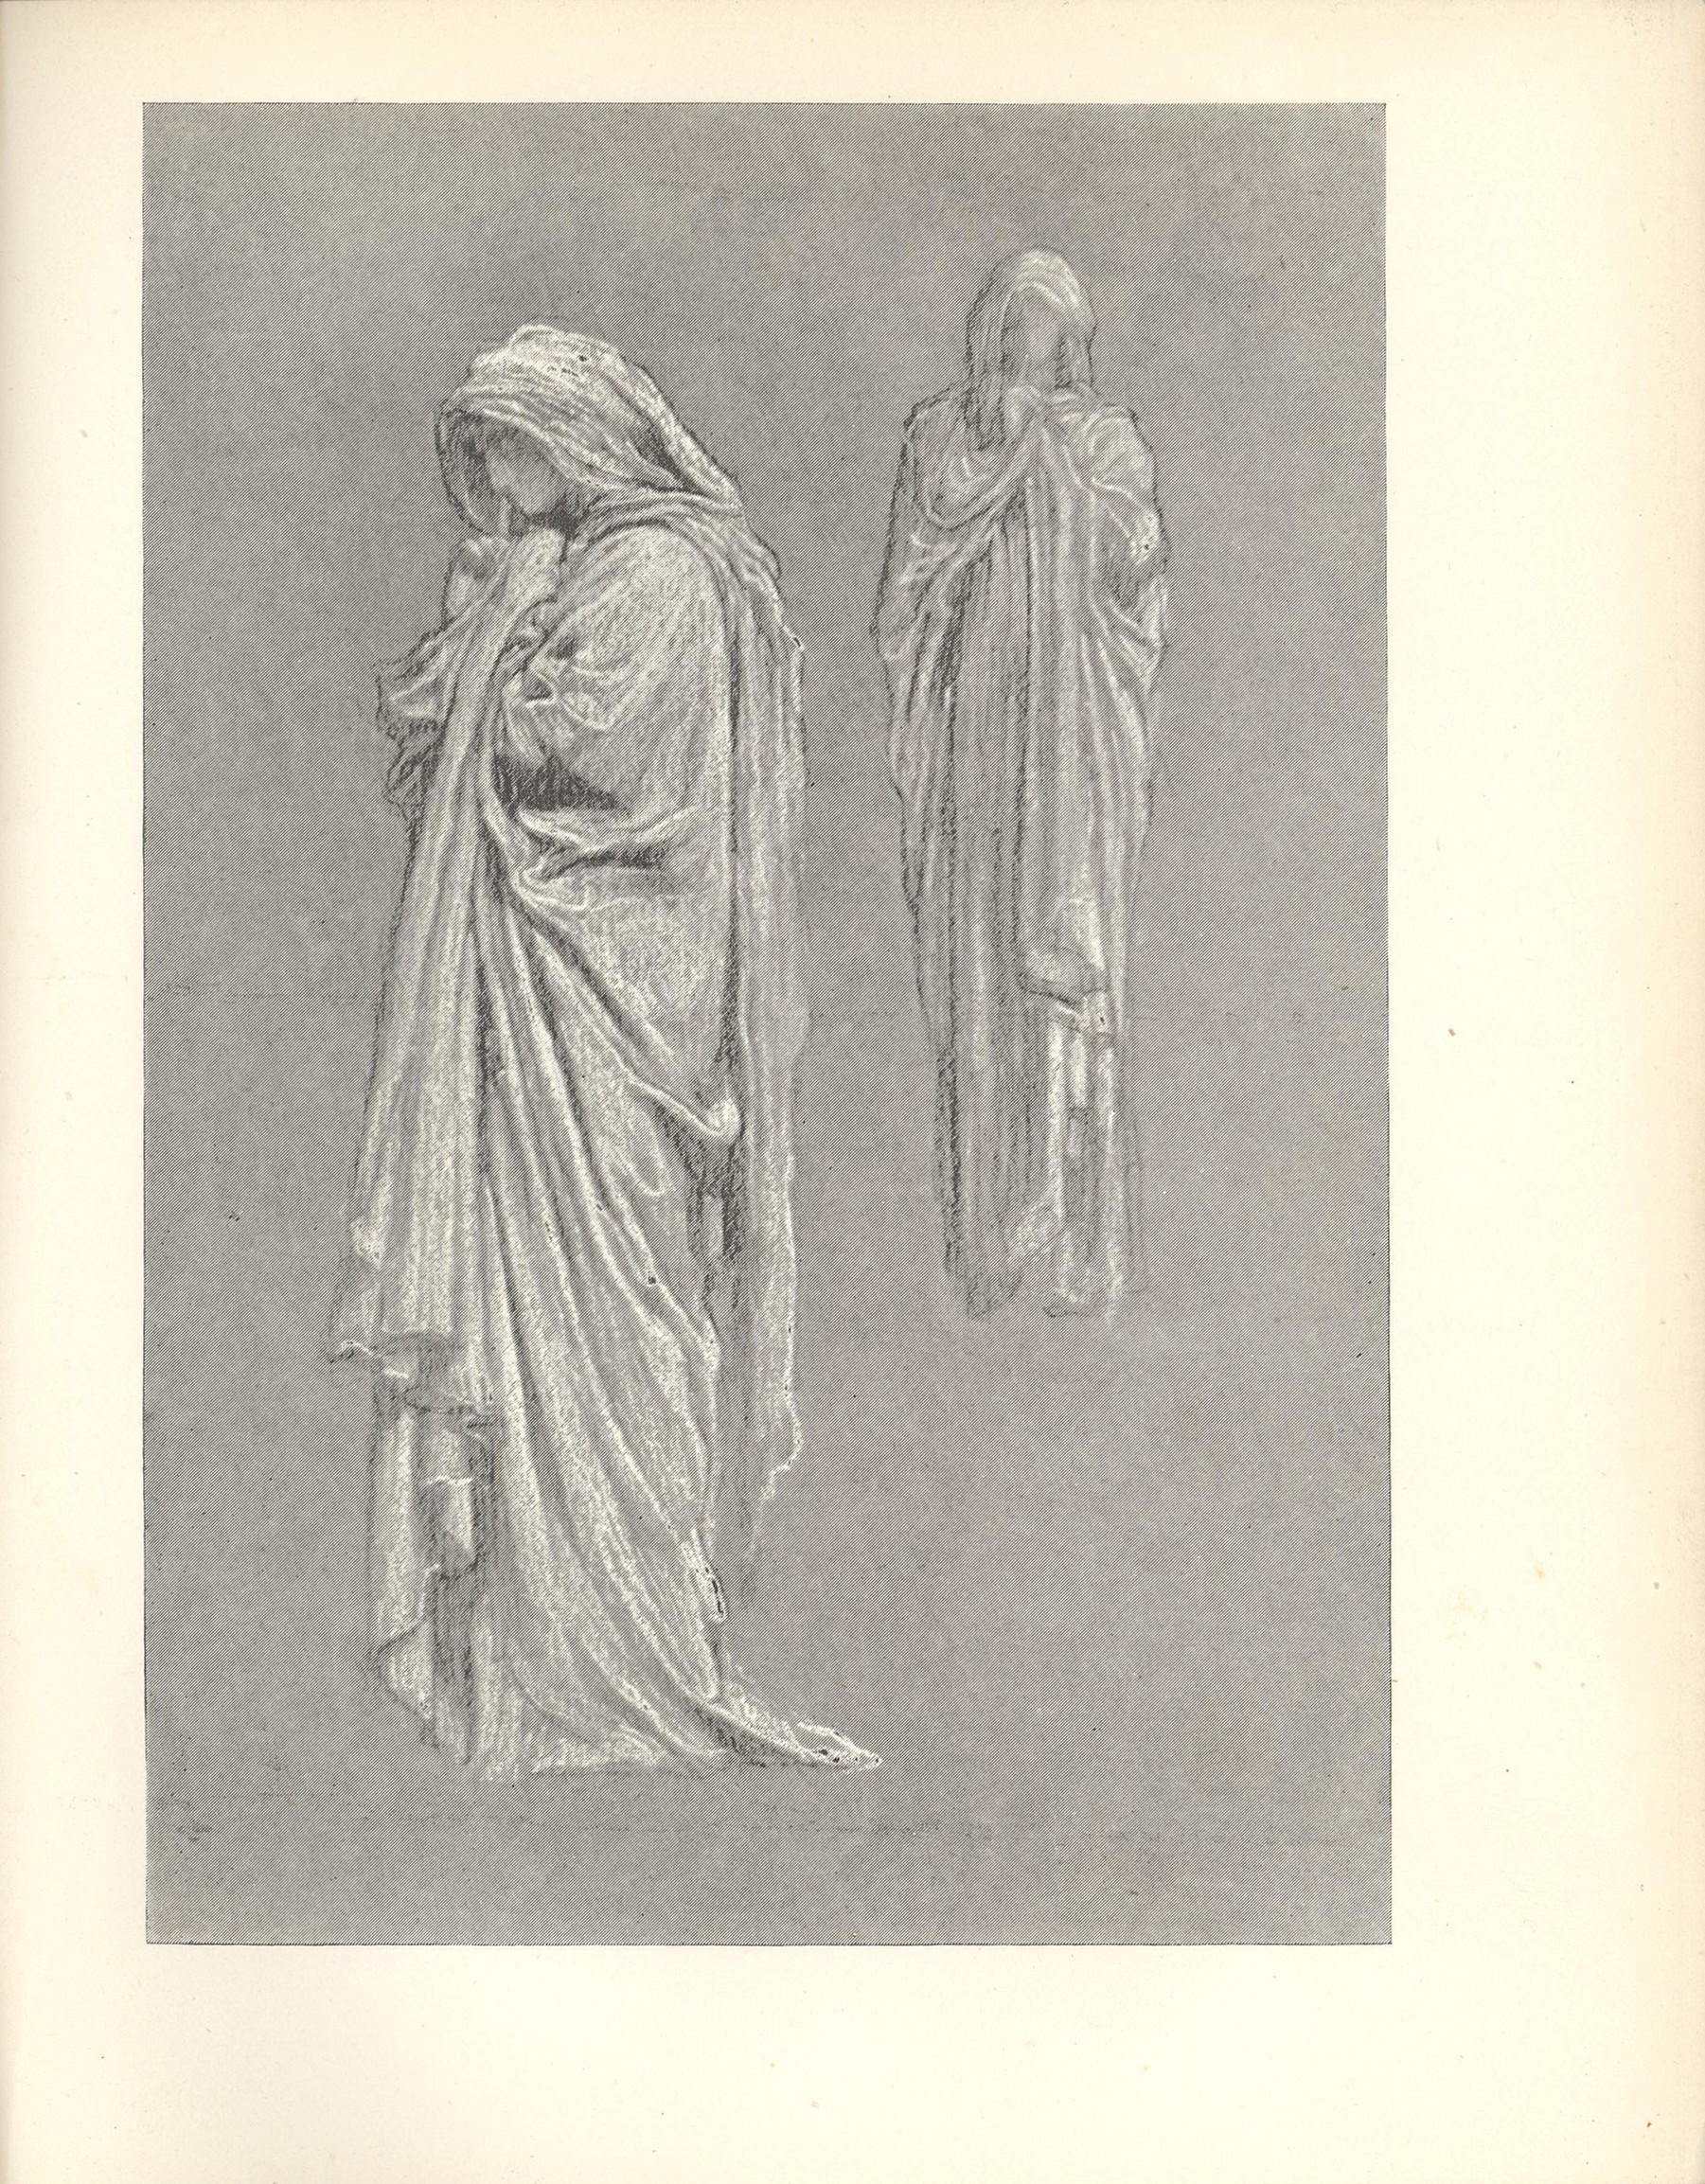 Image is a study of two adults of indeterminate gender shown full length in draperies The figure on the left is in the foreground shown in profile looking to the left this figure takes up half of the picture frame This figure s face is downcast resting on its hands a finger on the right hand is extended to touch its face The second adult is in the background to the right This draped figure is shown frontally Both figures have their hands clasped in a contemplative or praying manner The background is open The image is vertically displayed